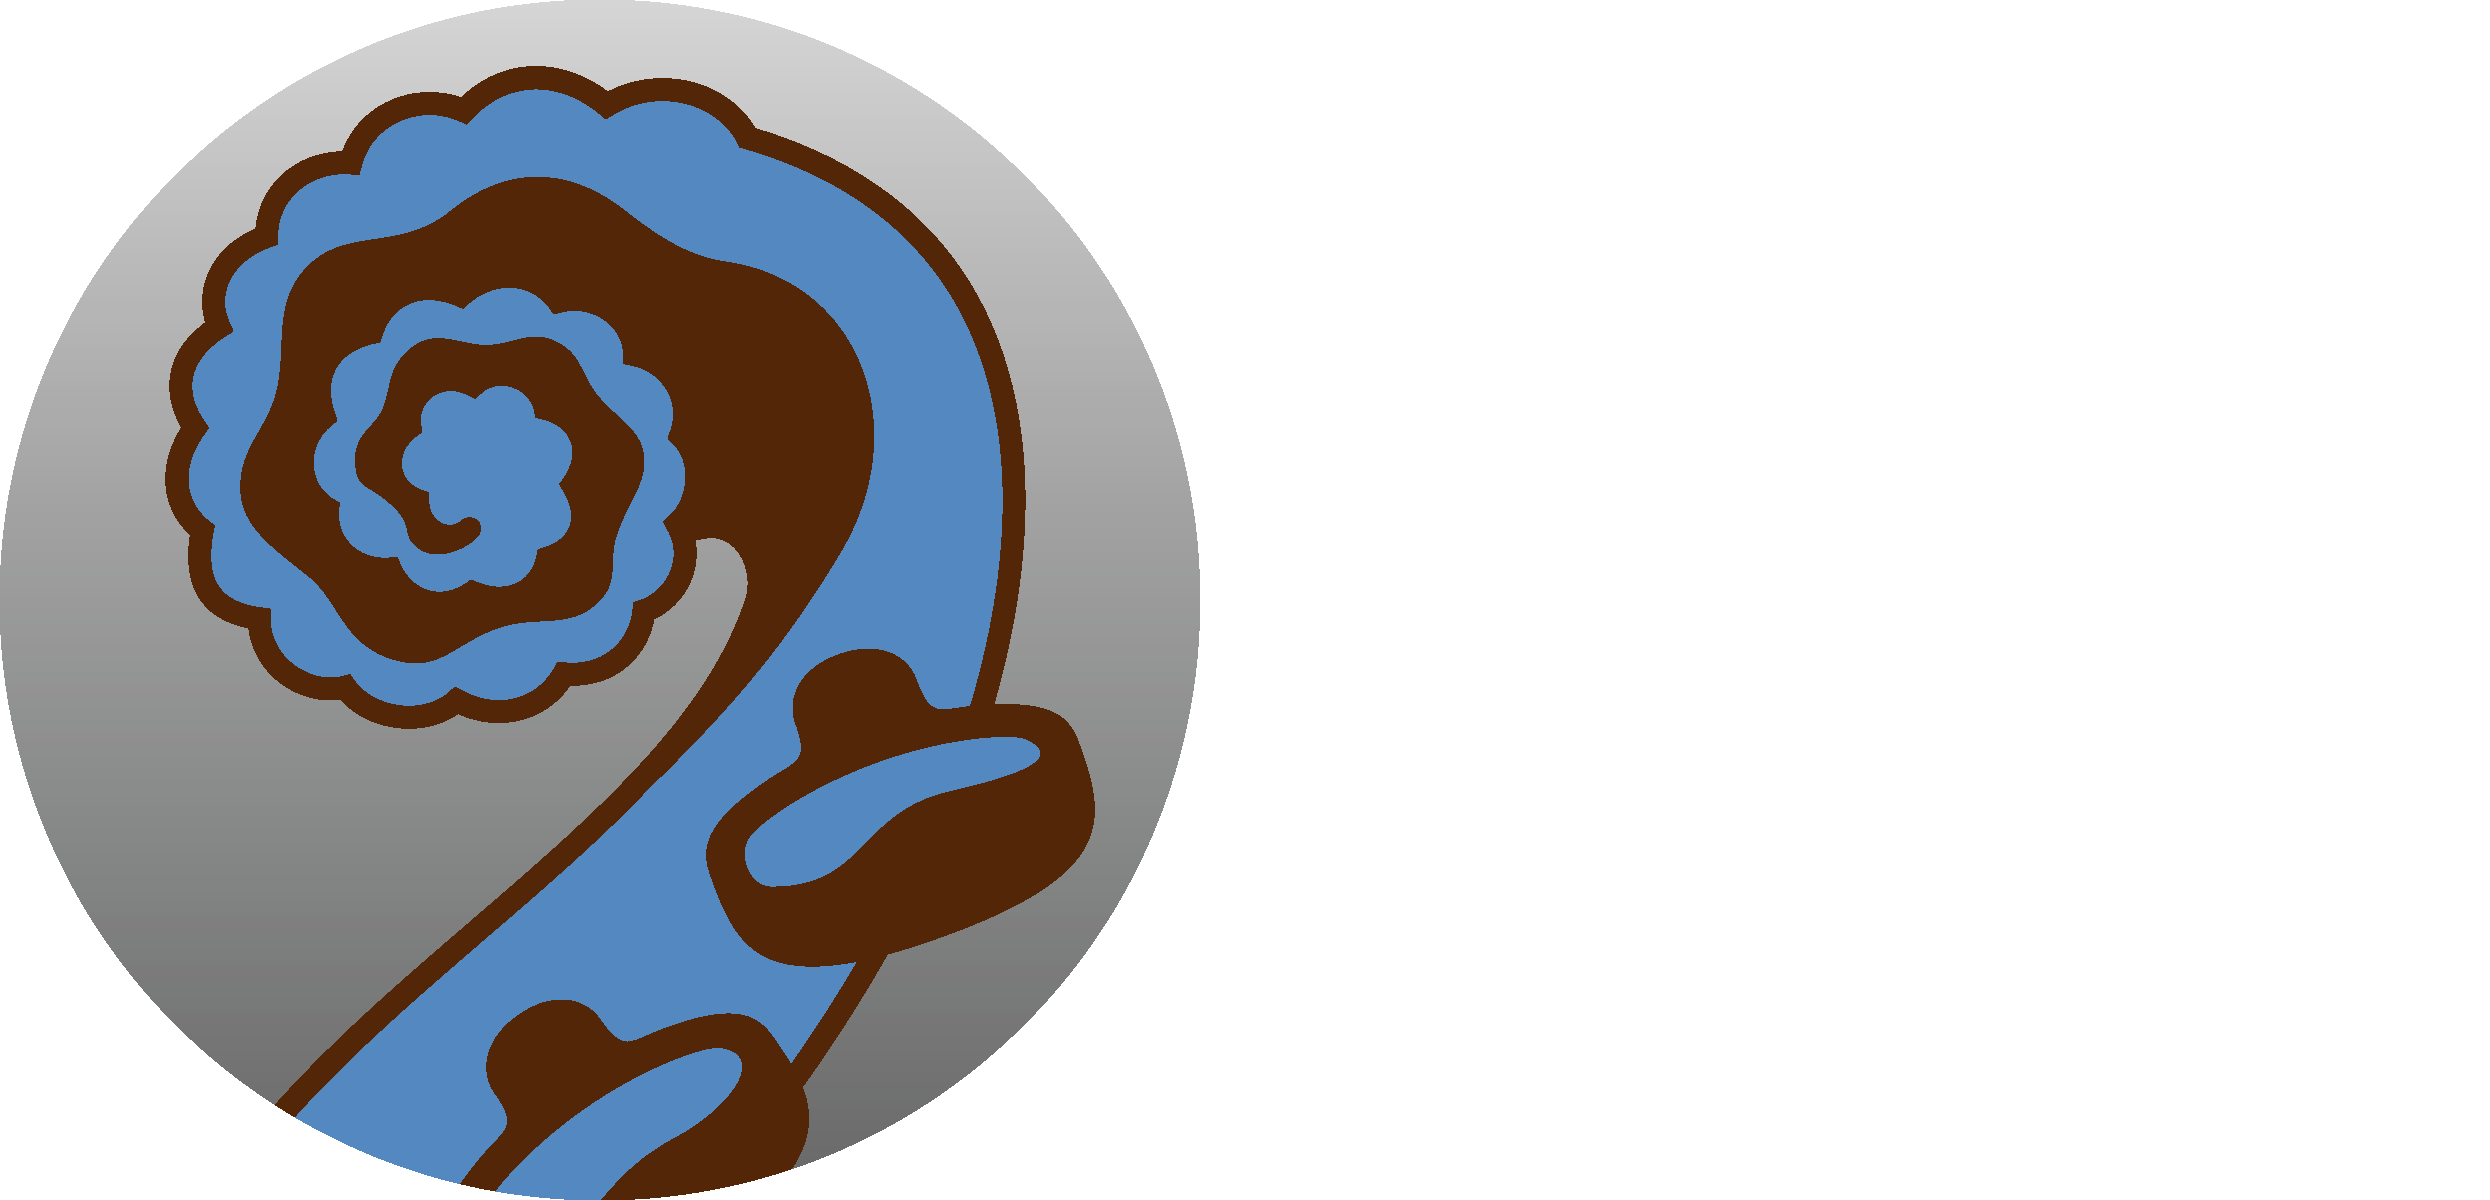 Logo for a classical music chamber group. The image is a close-up of the scroll of a violin, with the scroll gradually turning into clouds that evoke classical Chinese and Japanese art styles. The symbol is in blue and brown, encased in a circle filled with a gradient from light to medium gray. The words "MUSIK in the AIR" are to the side in white, in a modern but timeless sans serif..